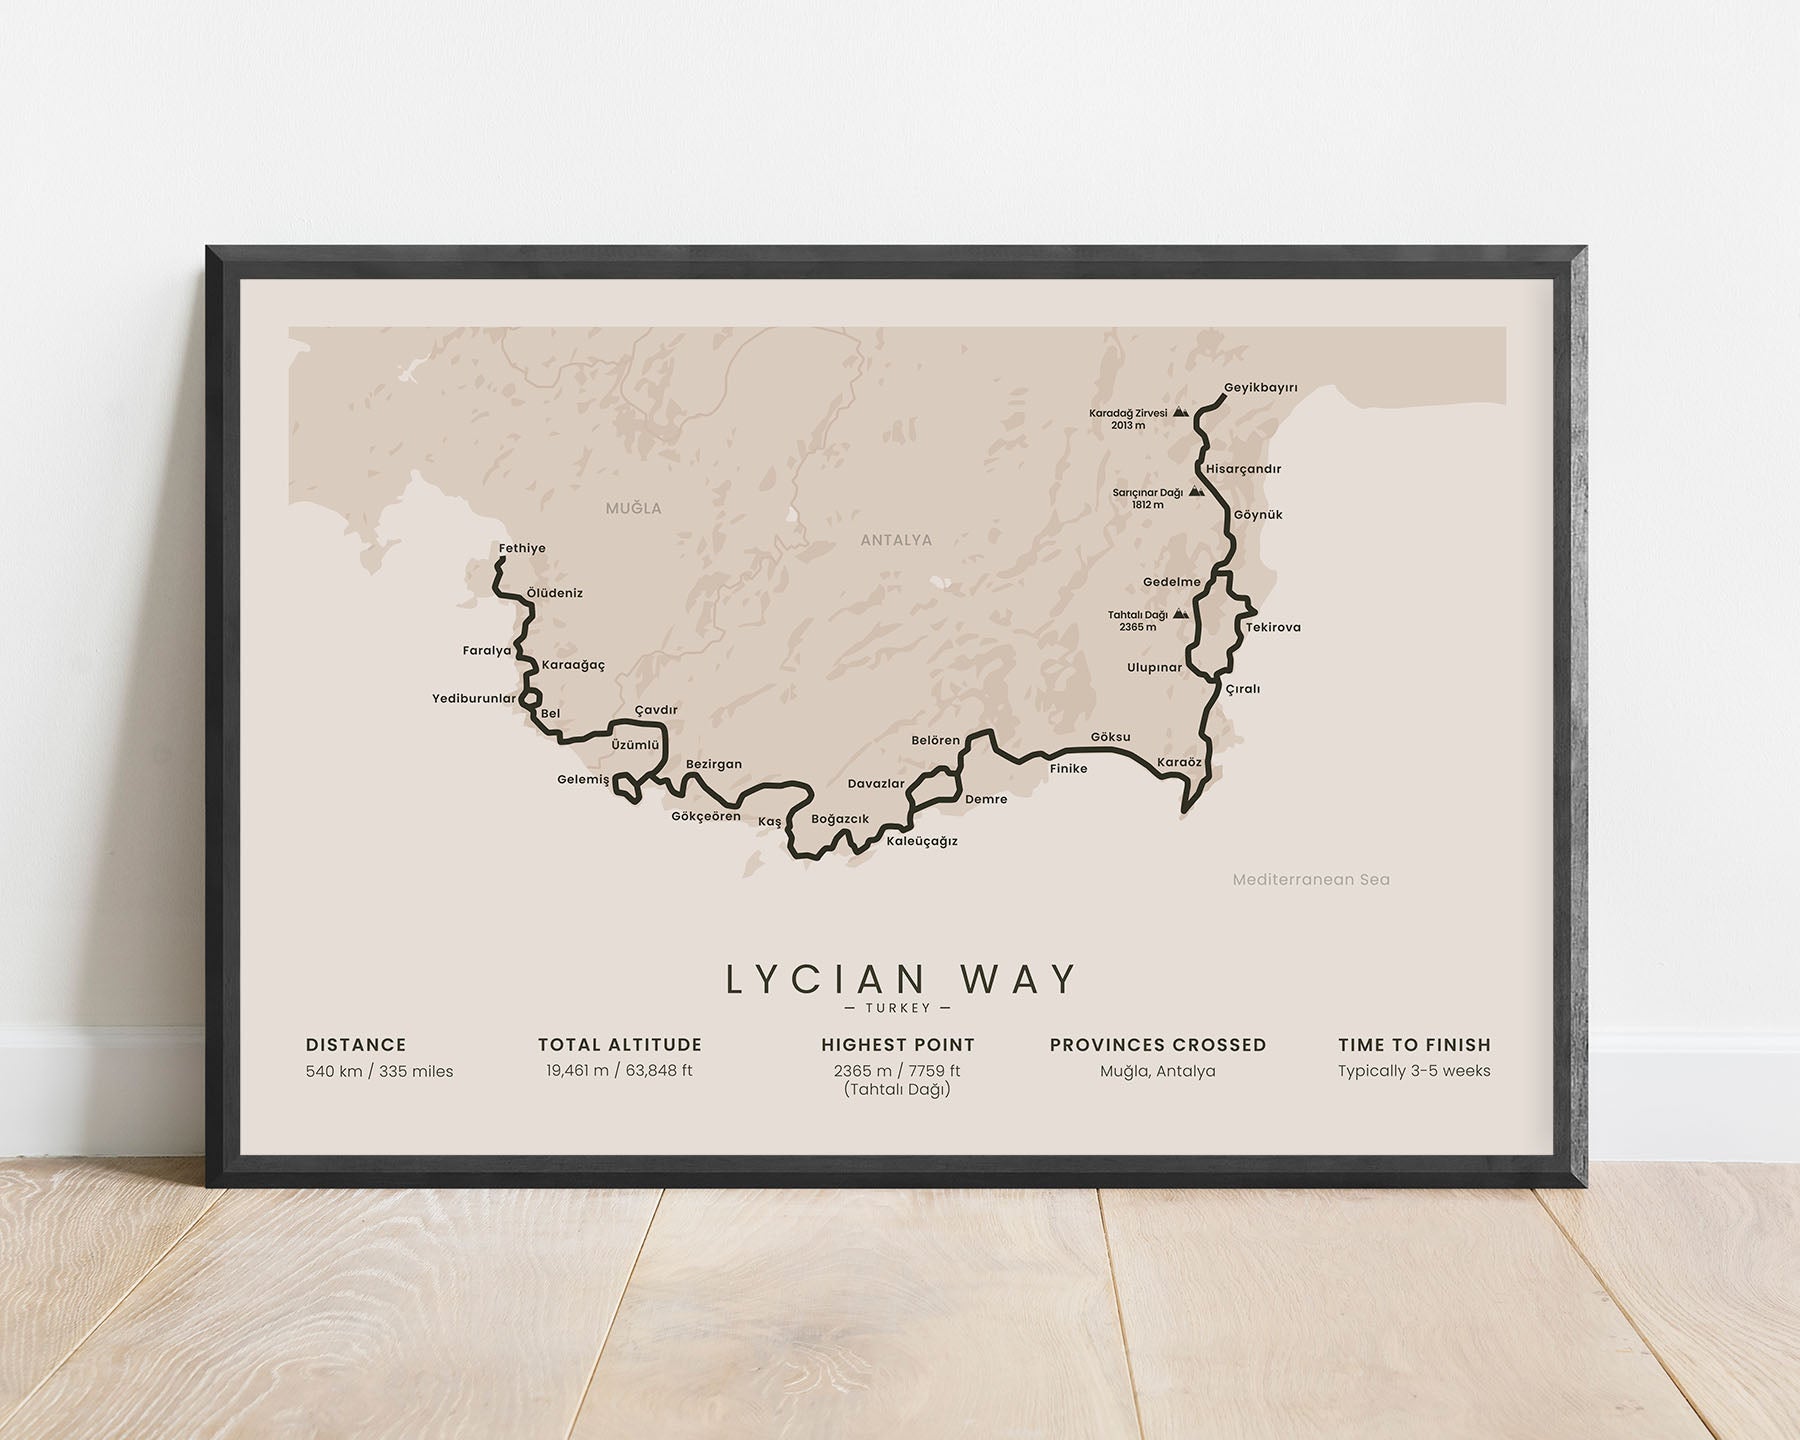 Lycian Way hiking trail in Mediterranean, South Turkey, minimalist map poster with black frame and beige background